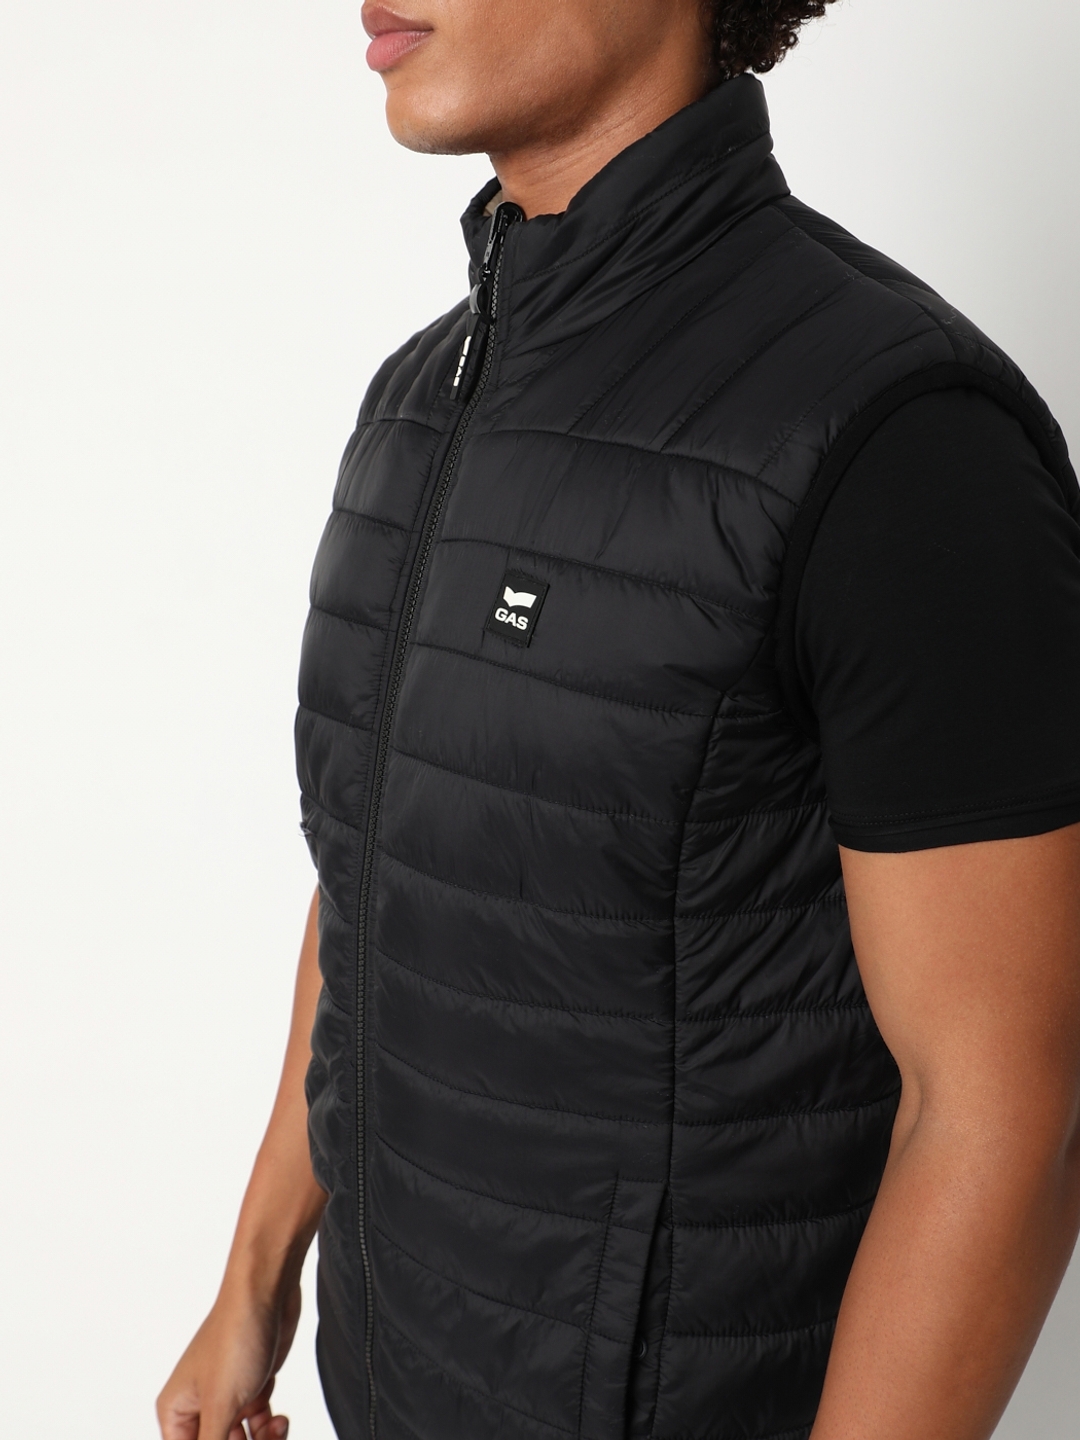 High Neck Body Warmer: Best High Neck Body Warmers in India for